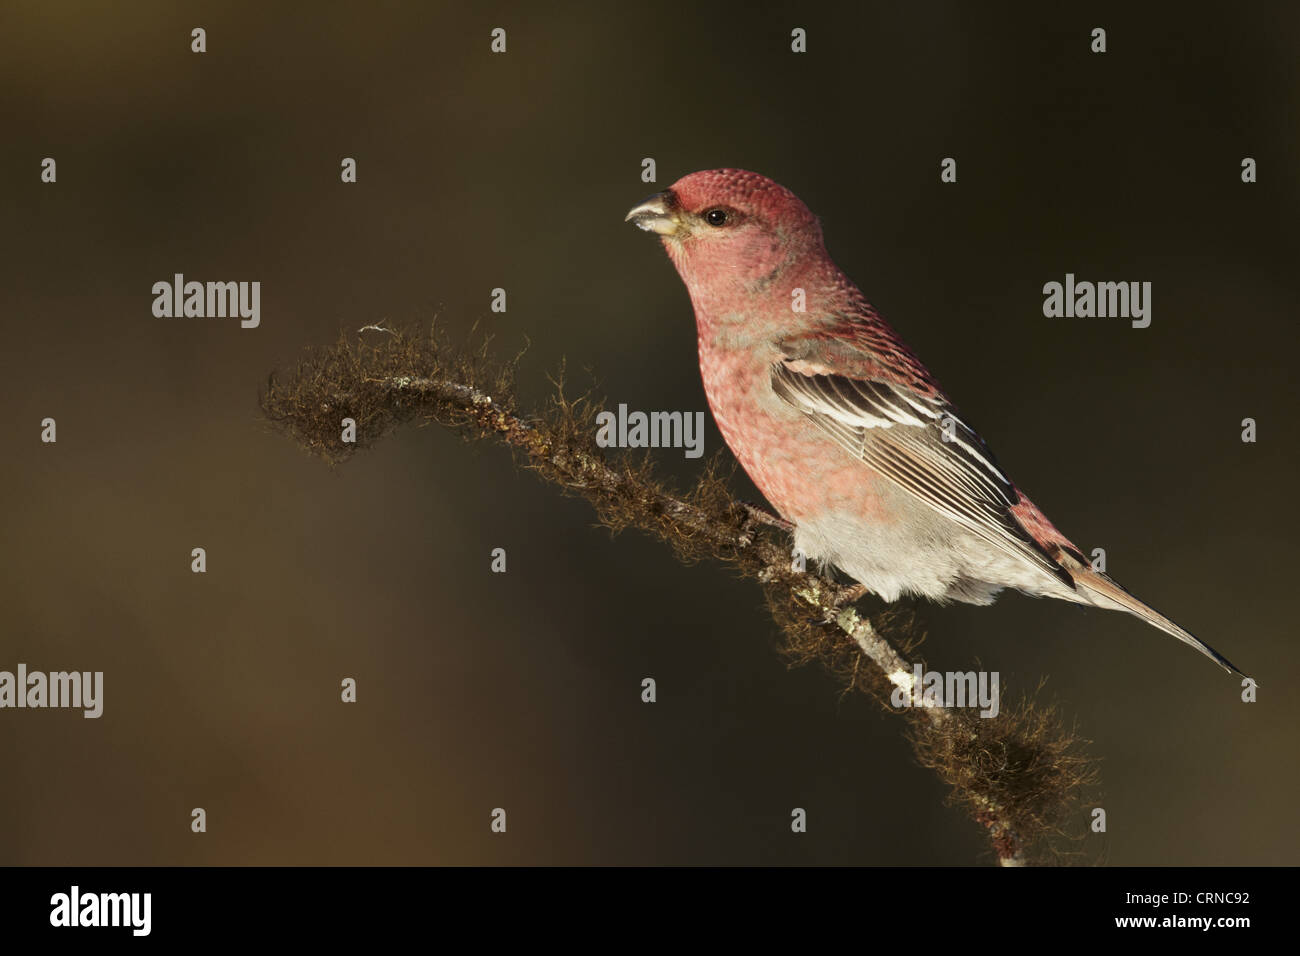 Pine Grosbeak (Pinicola enucleator) adult male, perched on lichen covered twig, Finland, march Stock Photo